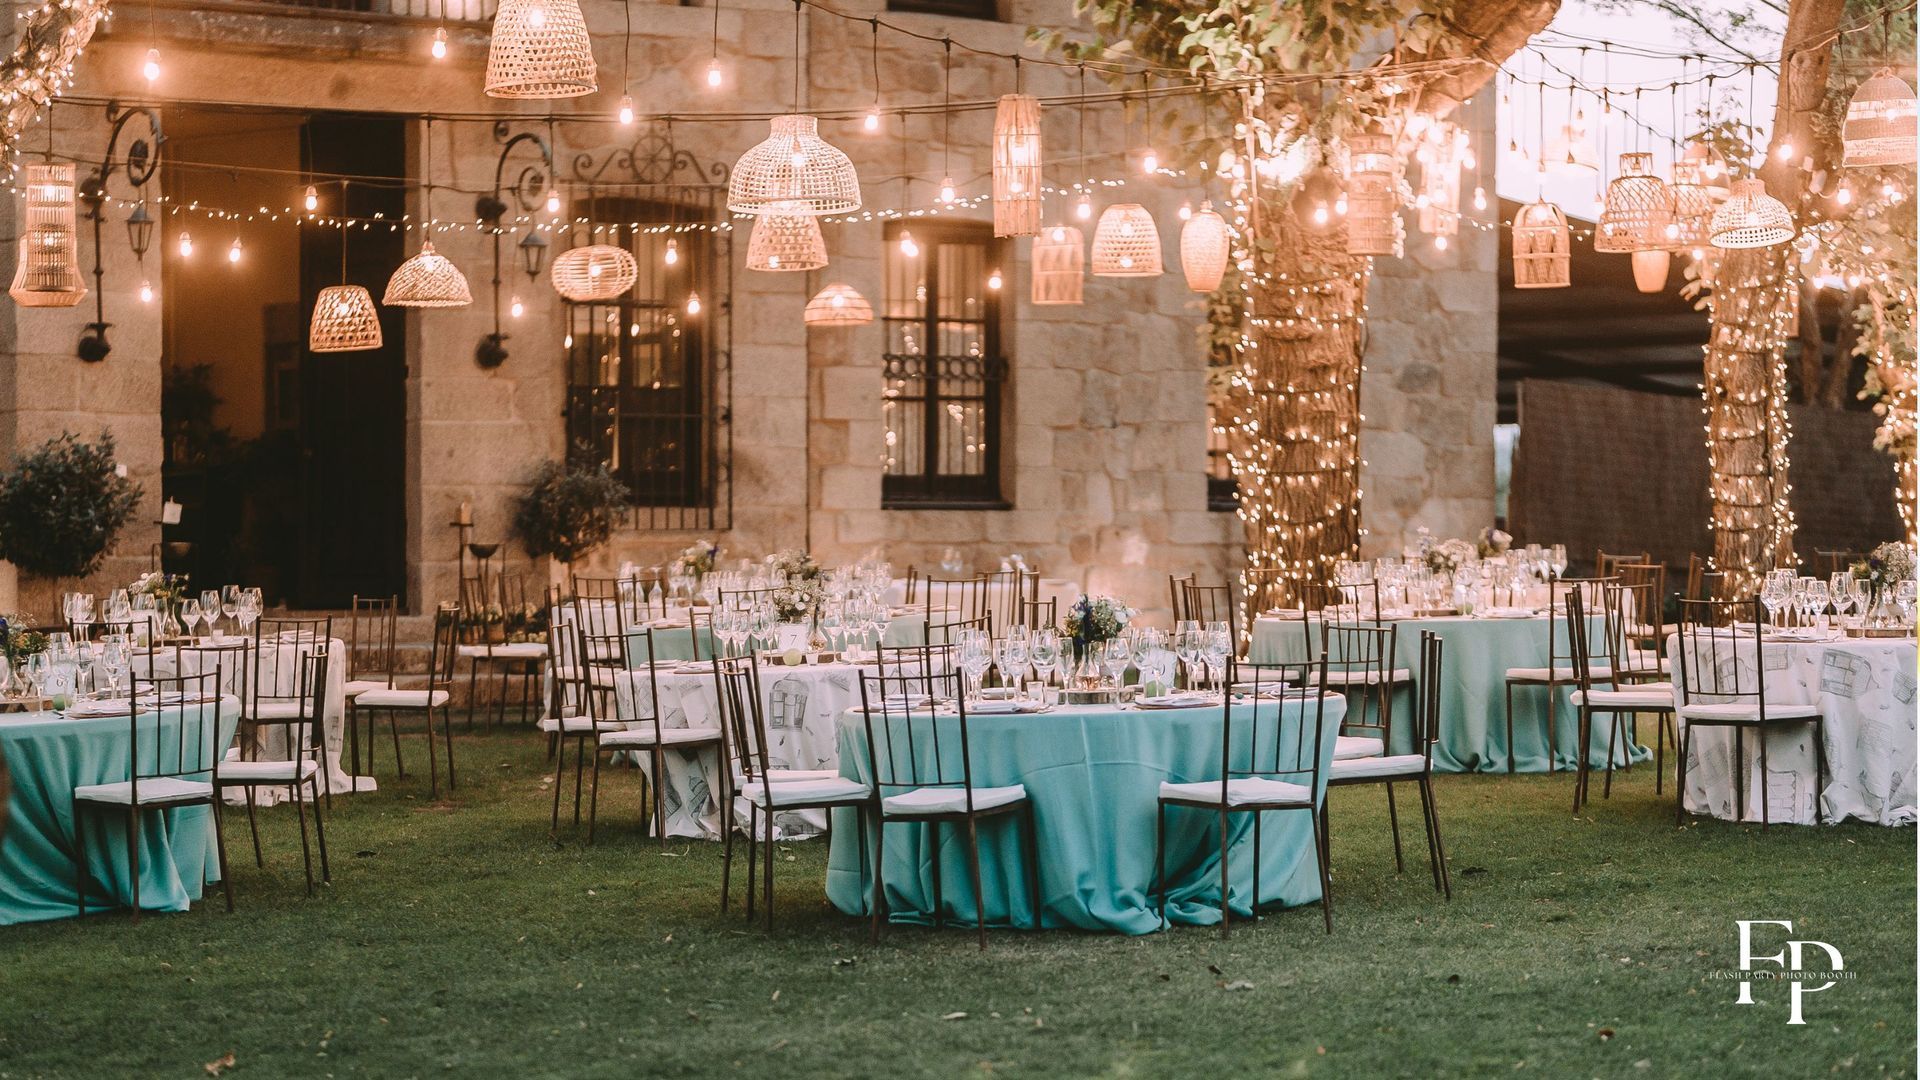 A beautiful arrangement of tables and chairs adorned with centerpieces for a wedding in Manor